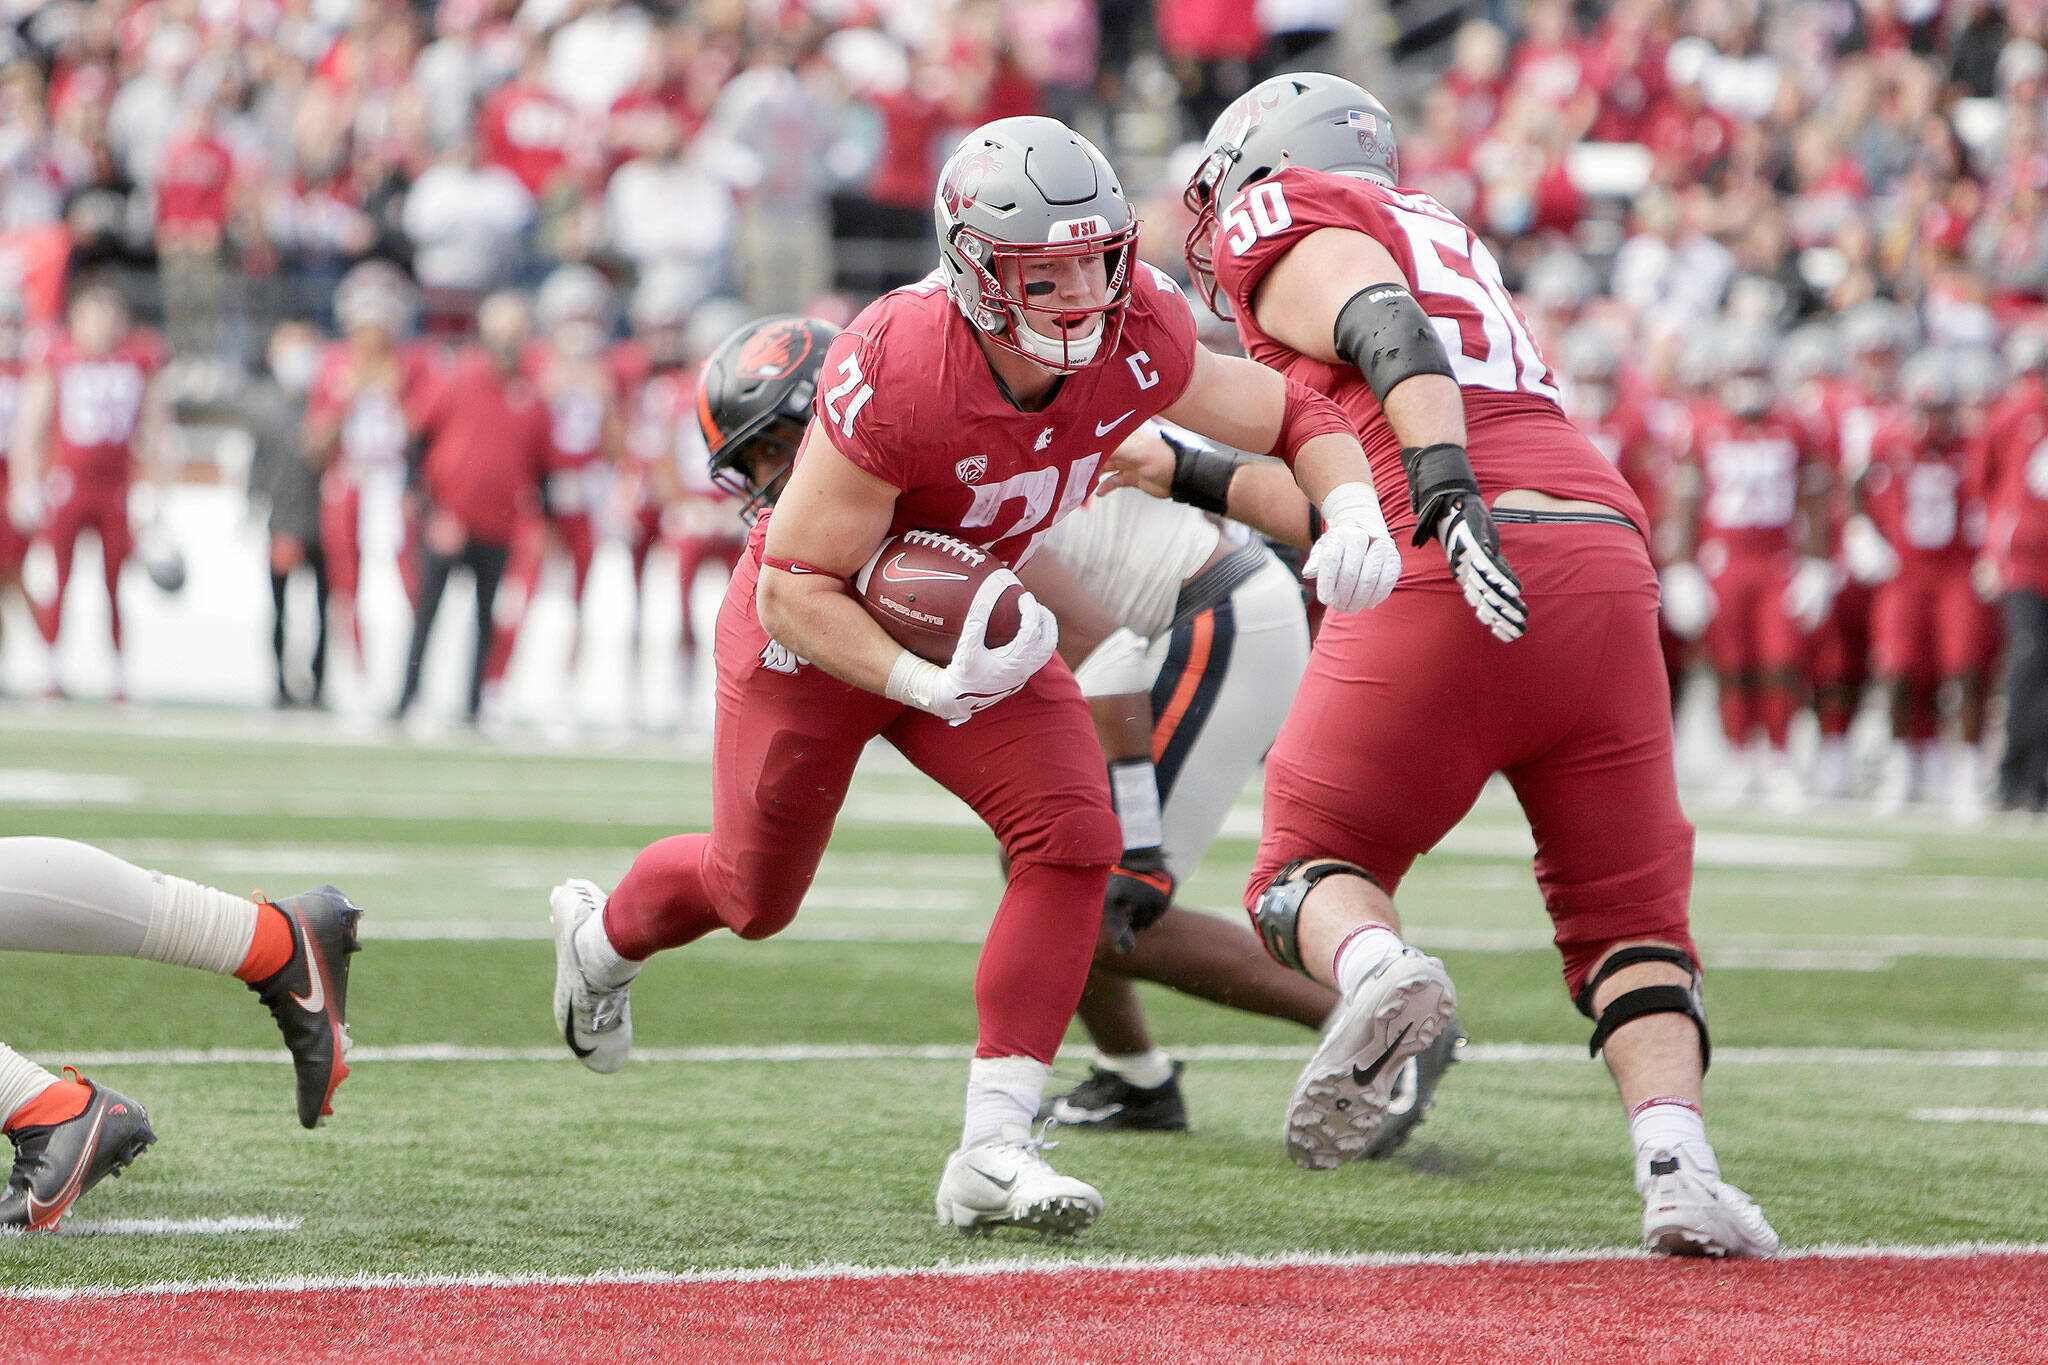 Washington State running back Max Borghi (21) runs for a touchdown during the second half of a game against Oregon State on Saturday in Pullman. (AP Photo/Young Kwak)